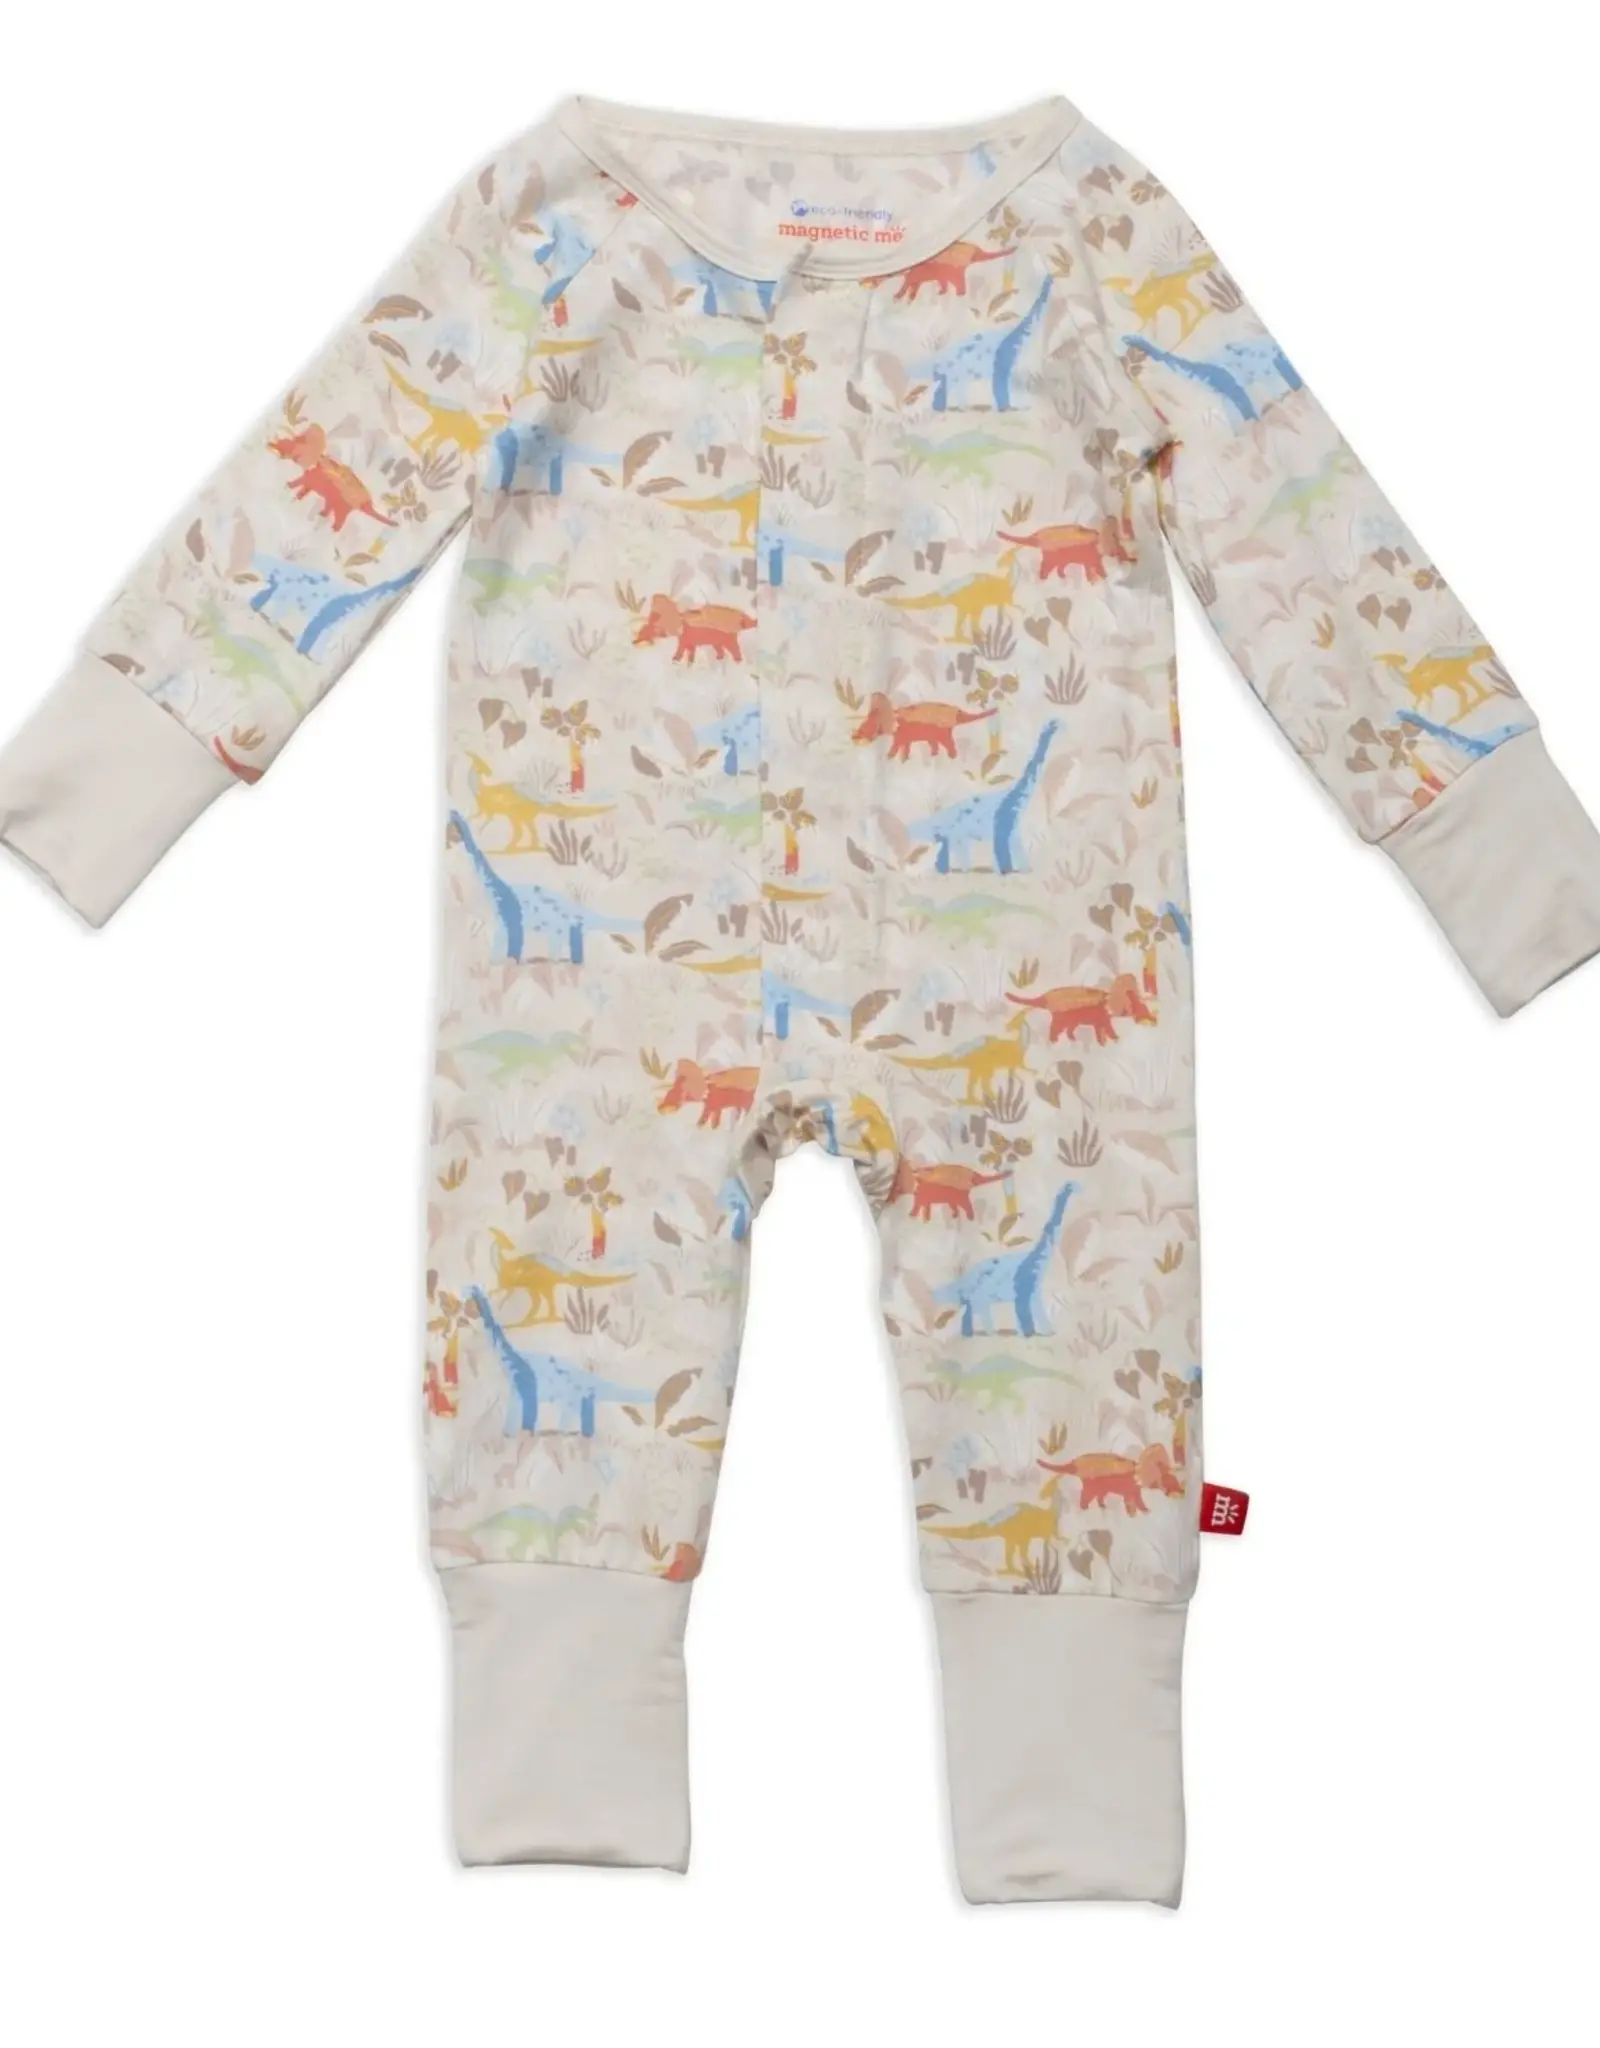 Magnetic Me 3-6MO: EXT Roar Dinary Grow With Me Coverall